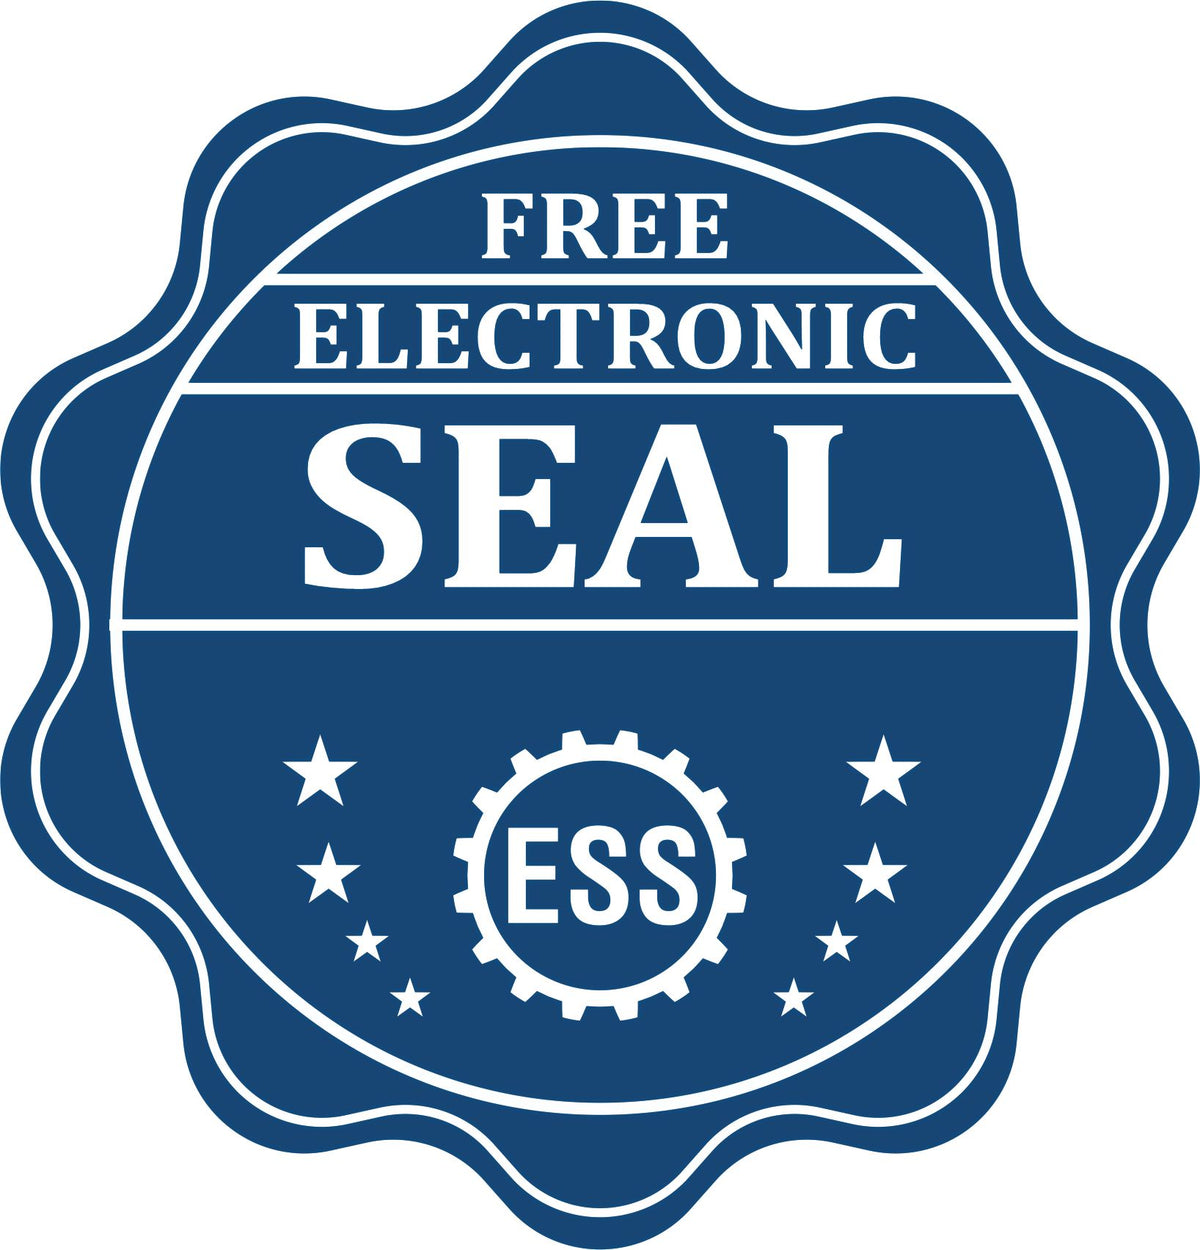 A badge showing a free electronic seal for the Gift Kentucky Architect Seal with stars and the ESS gear on the emblem.